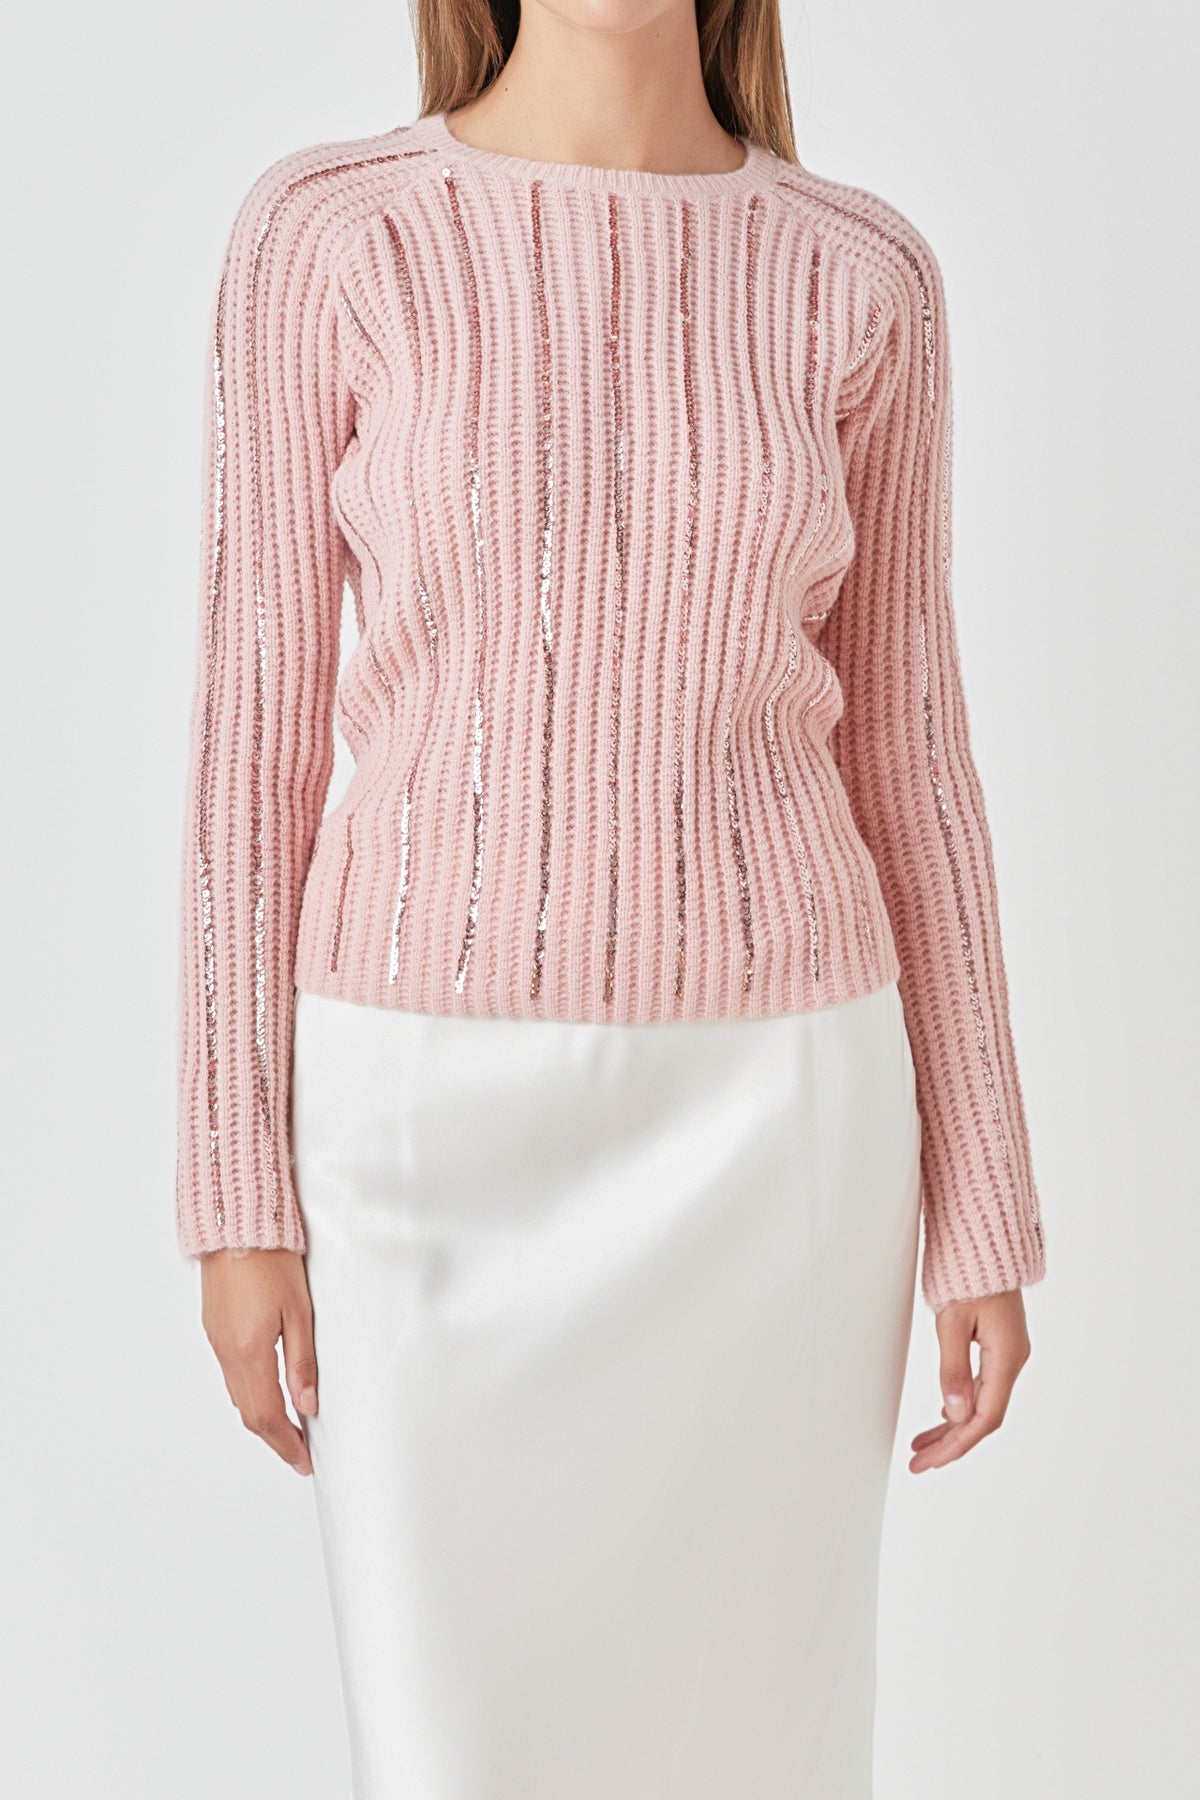 ENDLESS ROSE - Sequin Knit Sweater - SWEATERS & KNITS available at Objectrare